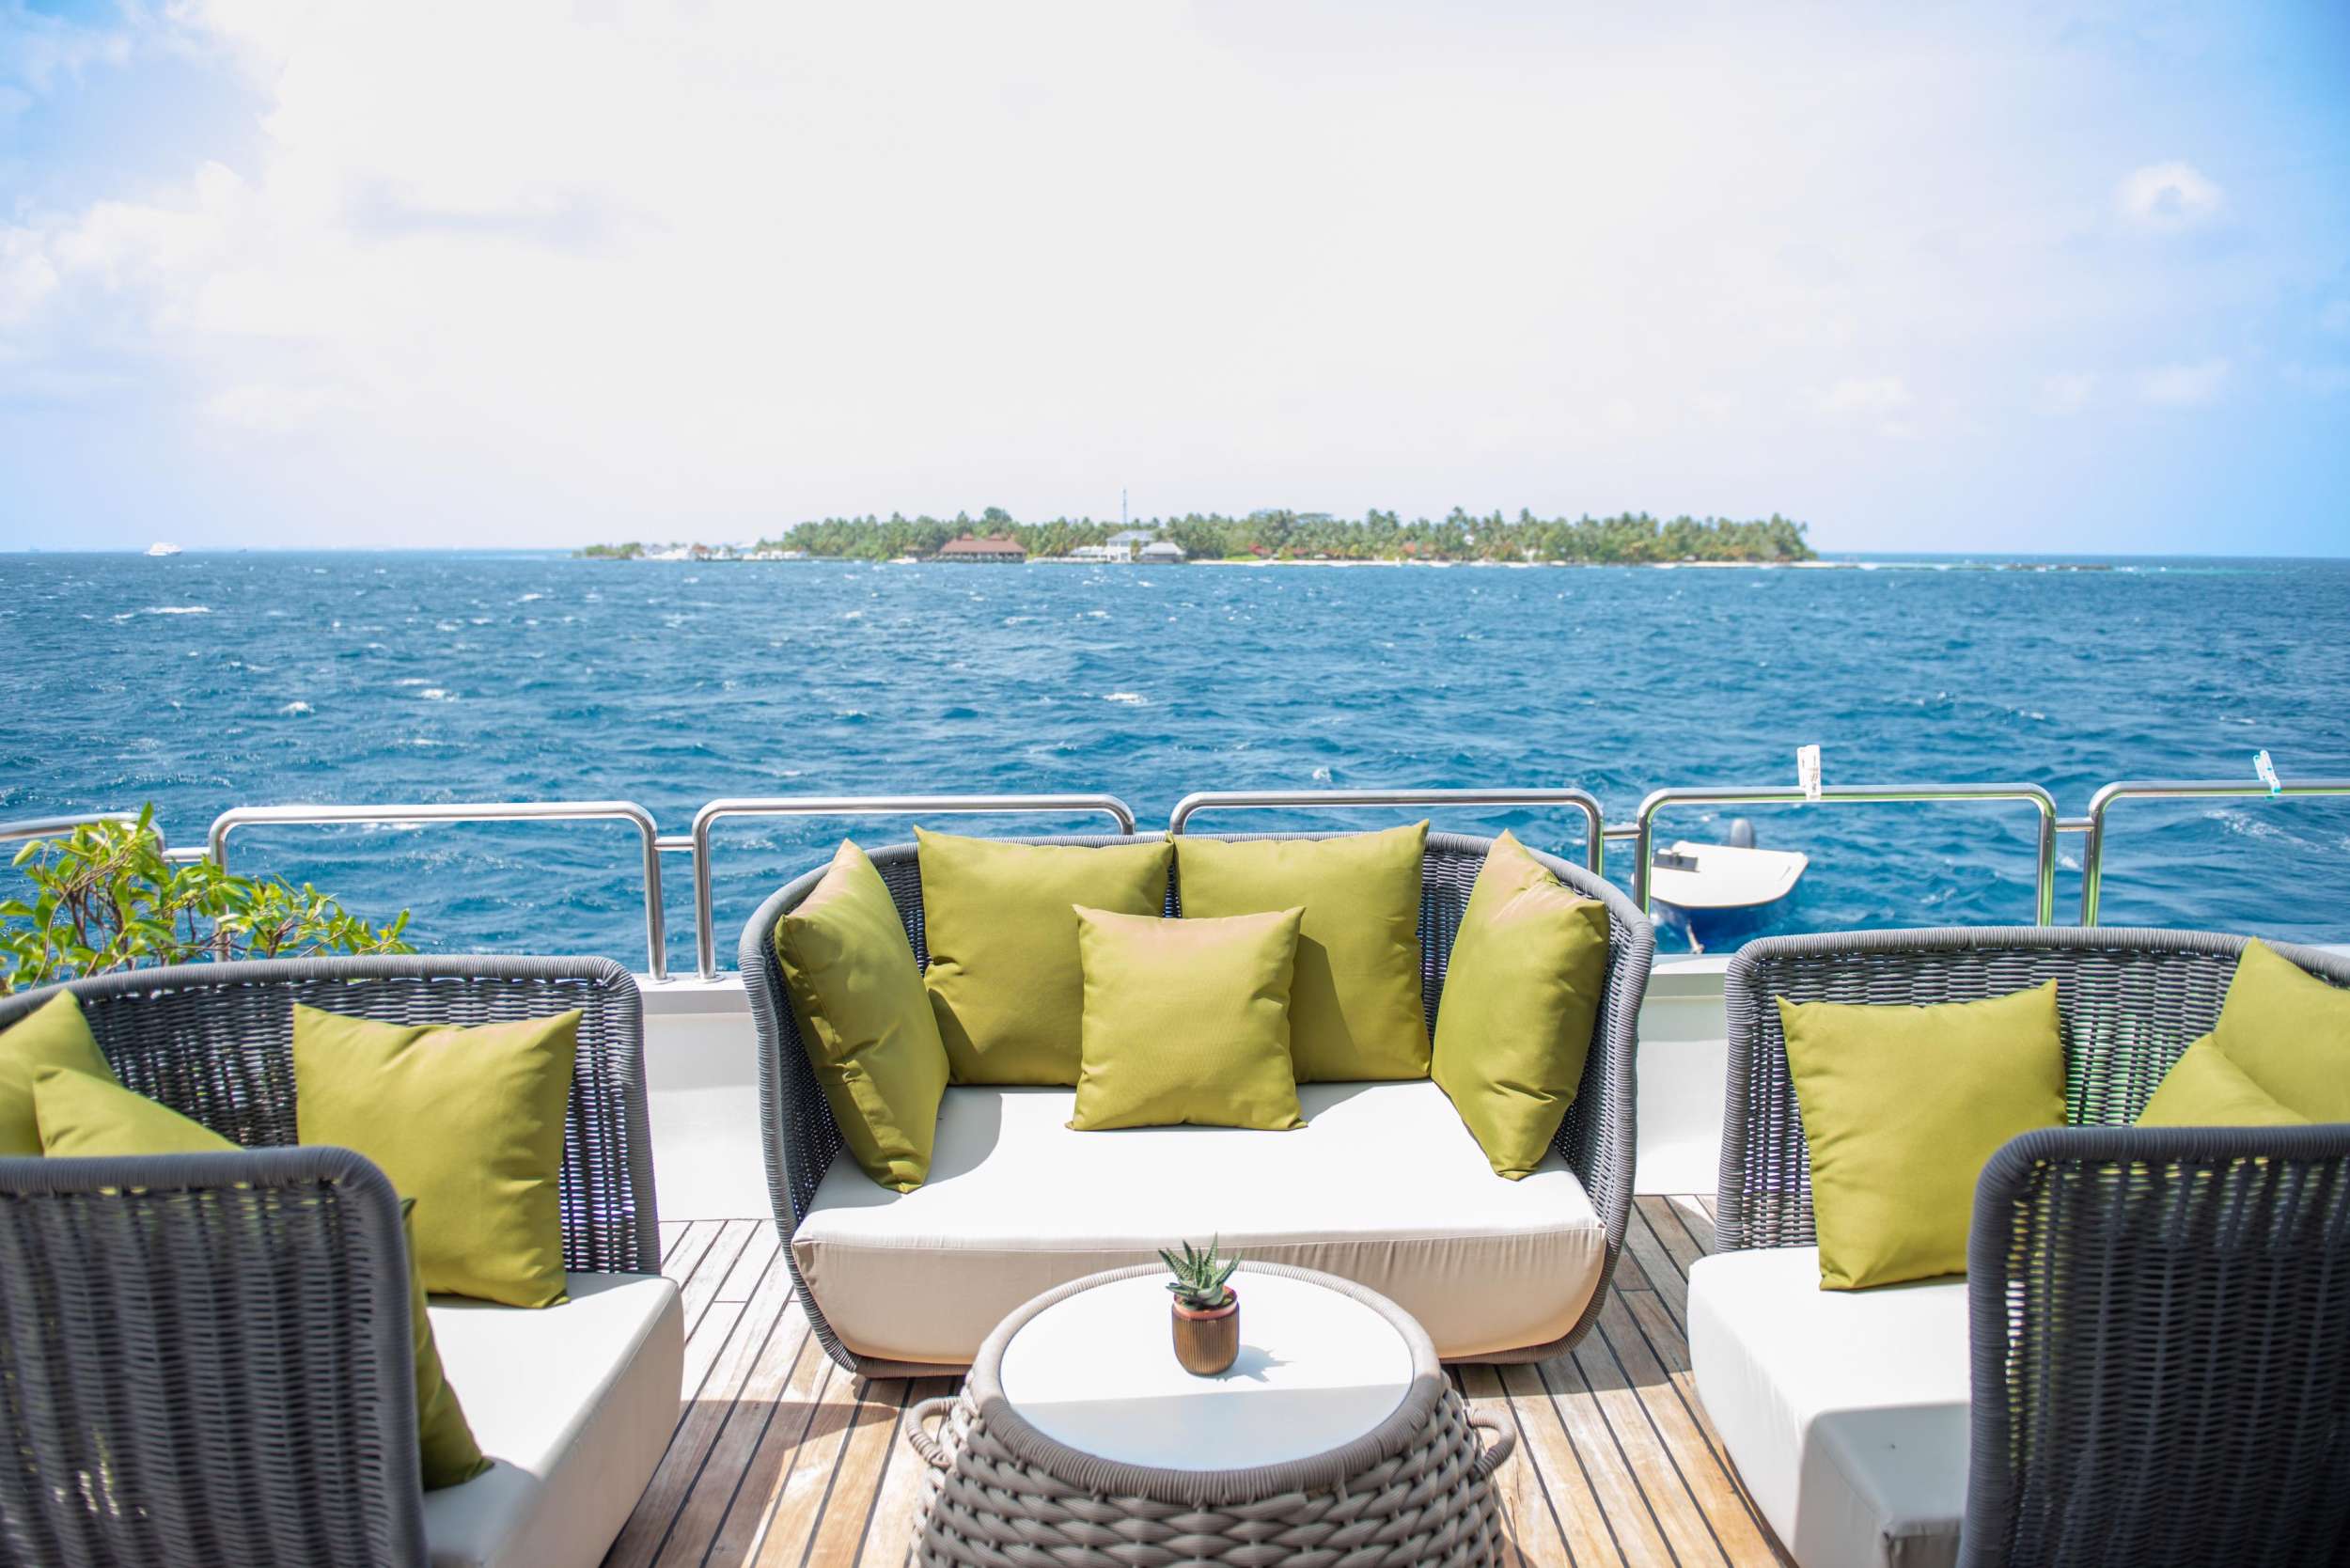 ARK NOBLE - Luxury yacht charter Maldives & Boat hire in Indian Ocean & SE Asia 6